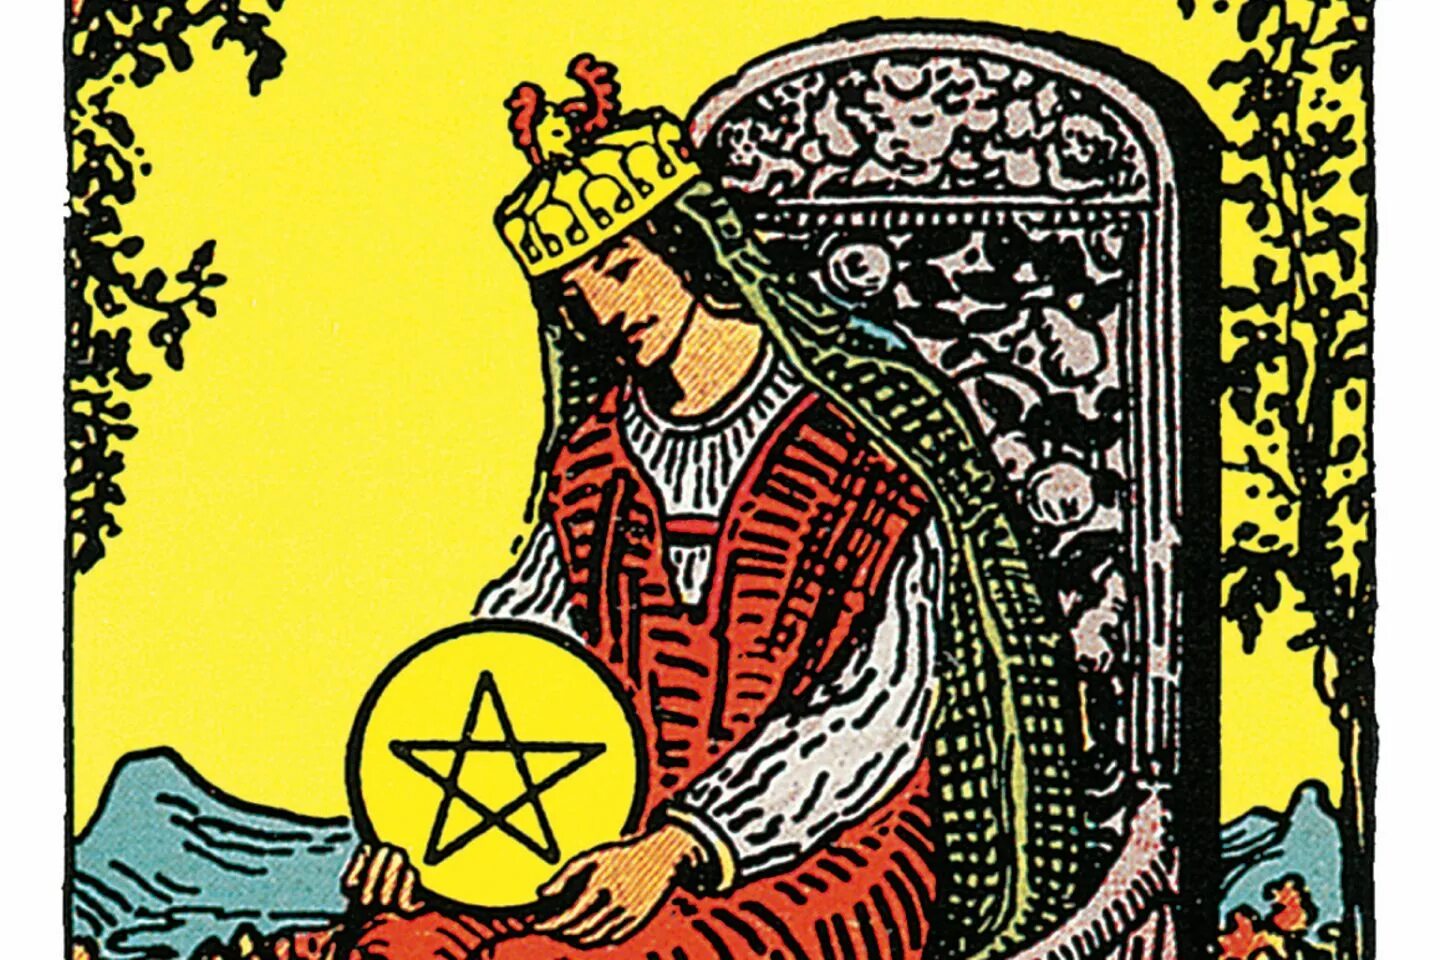 Queen of Pentacles Таро. Королева пентаклей Таро Уэйта. Карта Таро Королева пентаклей. Король пентаклей Уэйт. Королева пентаклей на будущее